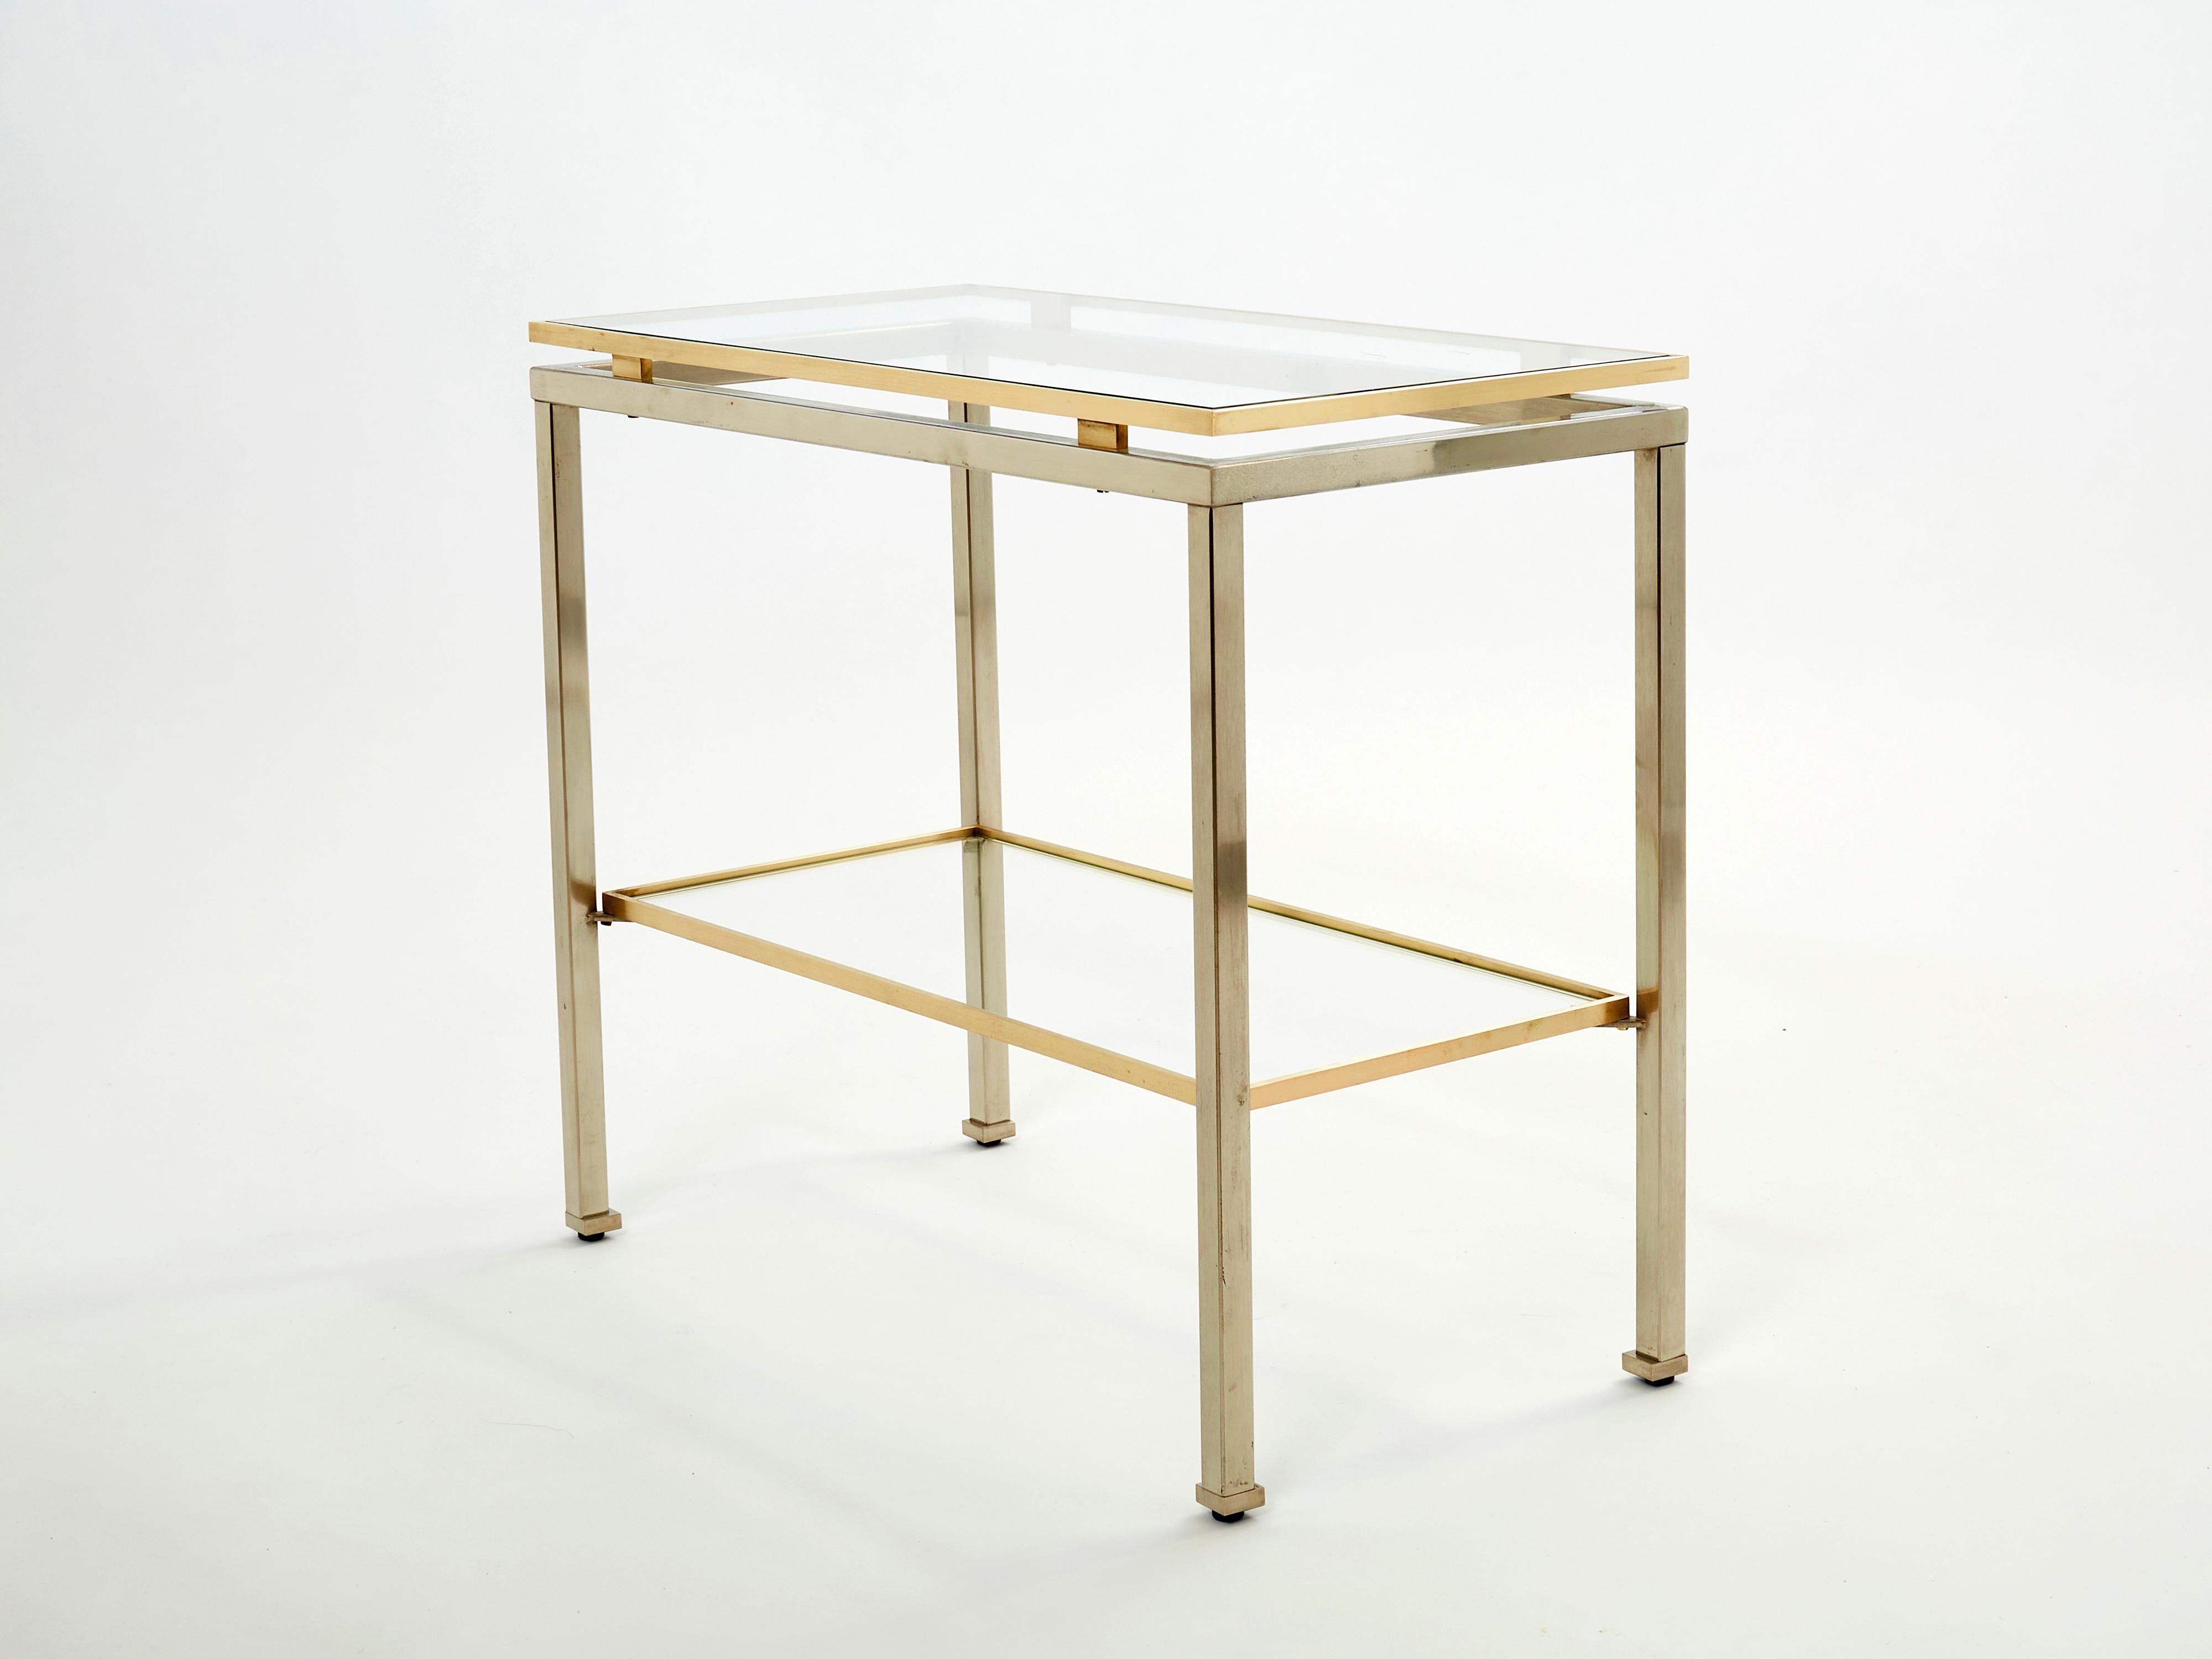 Brass Steel Two-Tier End Tables by Guy Lefevre for Maison Jansen, 1970s For Sale 1